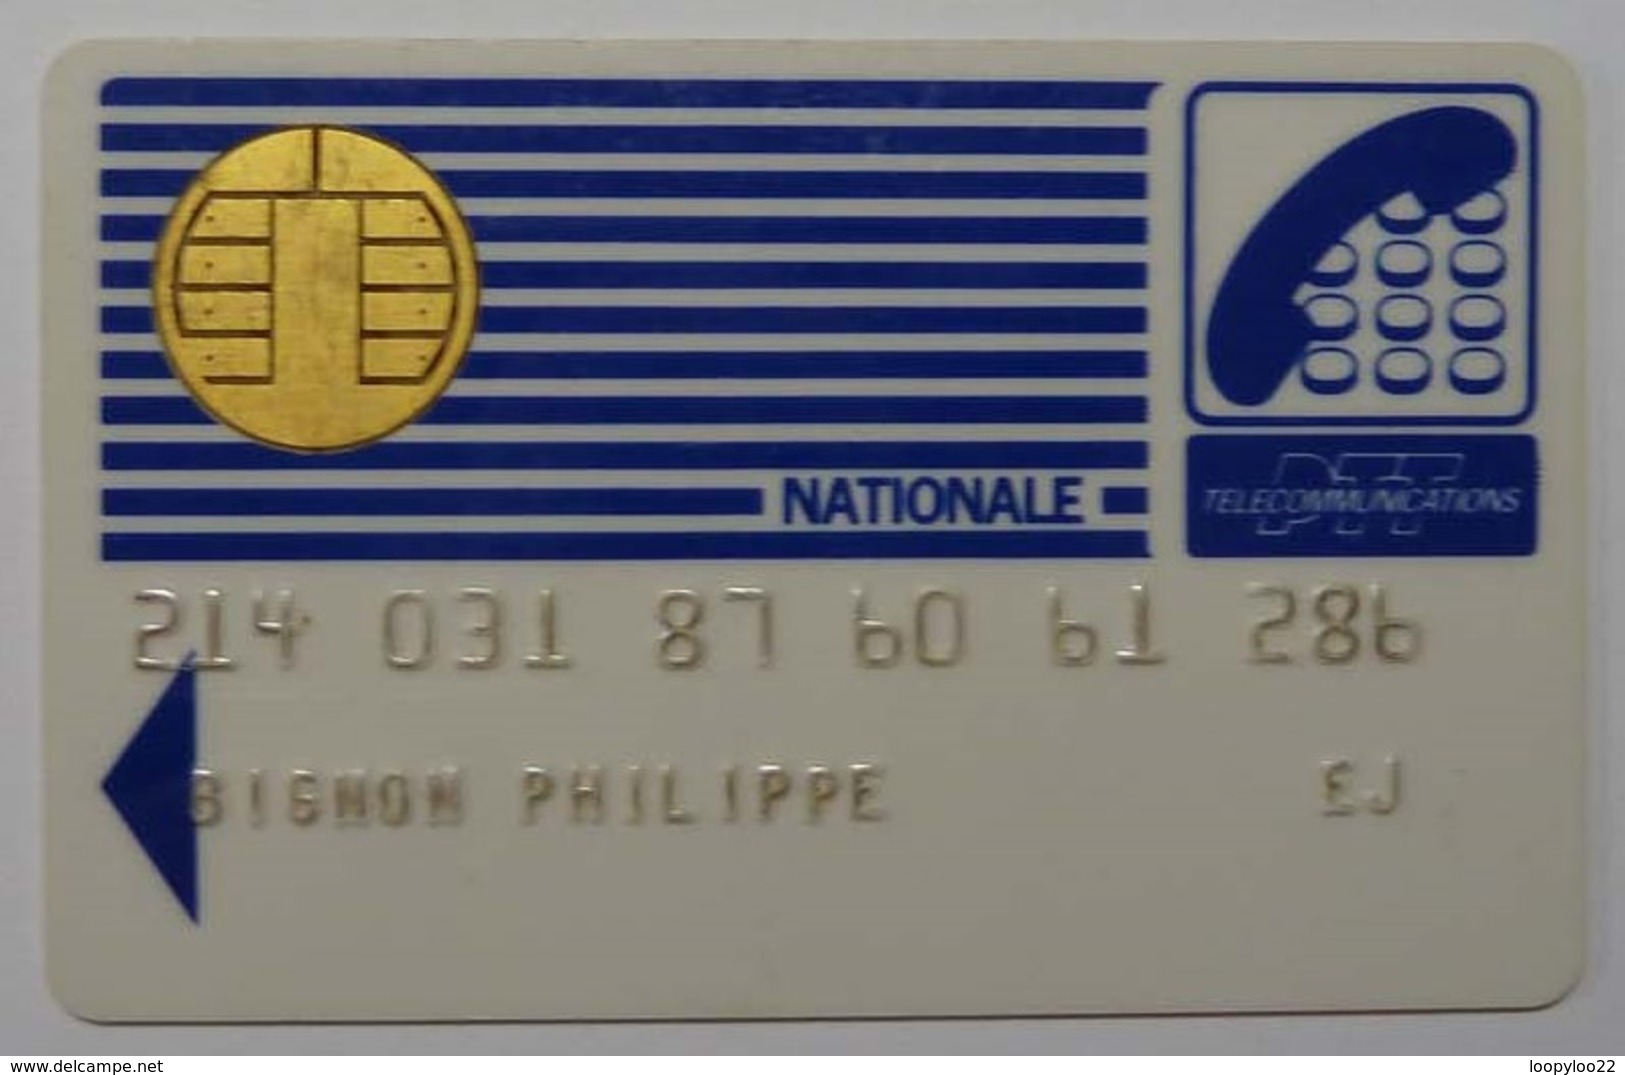 FRANCE - Bull Chip 1 - Rare Early Issue - Carte Telecommunications Nationale Calling Card - PTT - Used - Telefoonkaarten Voor Particulieren